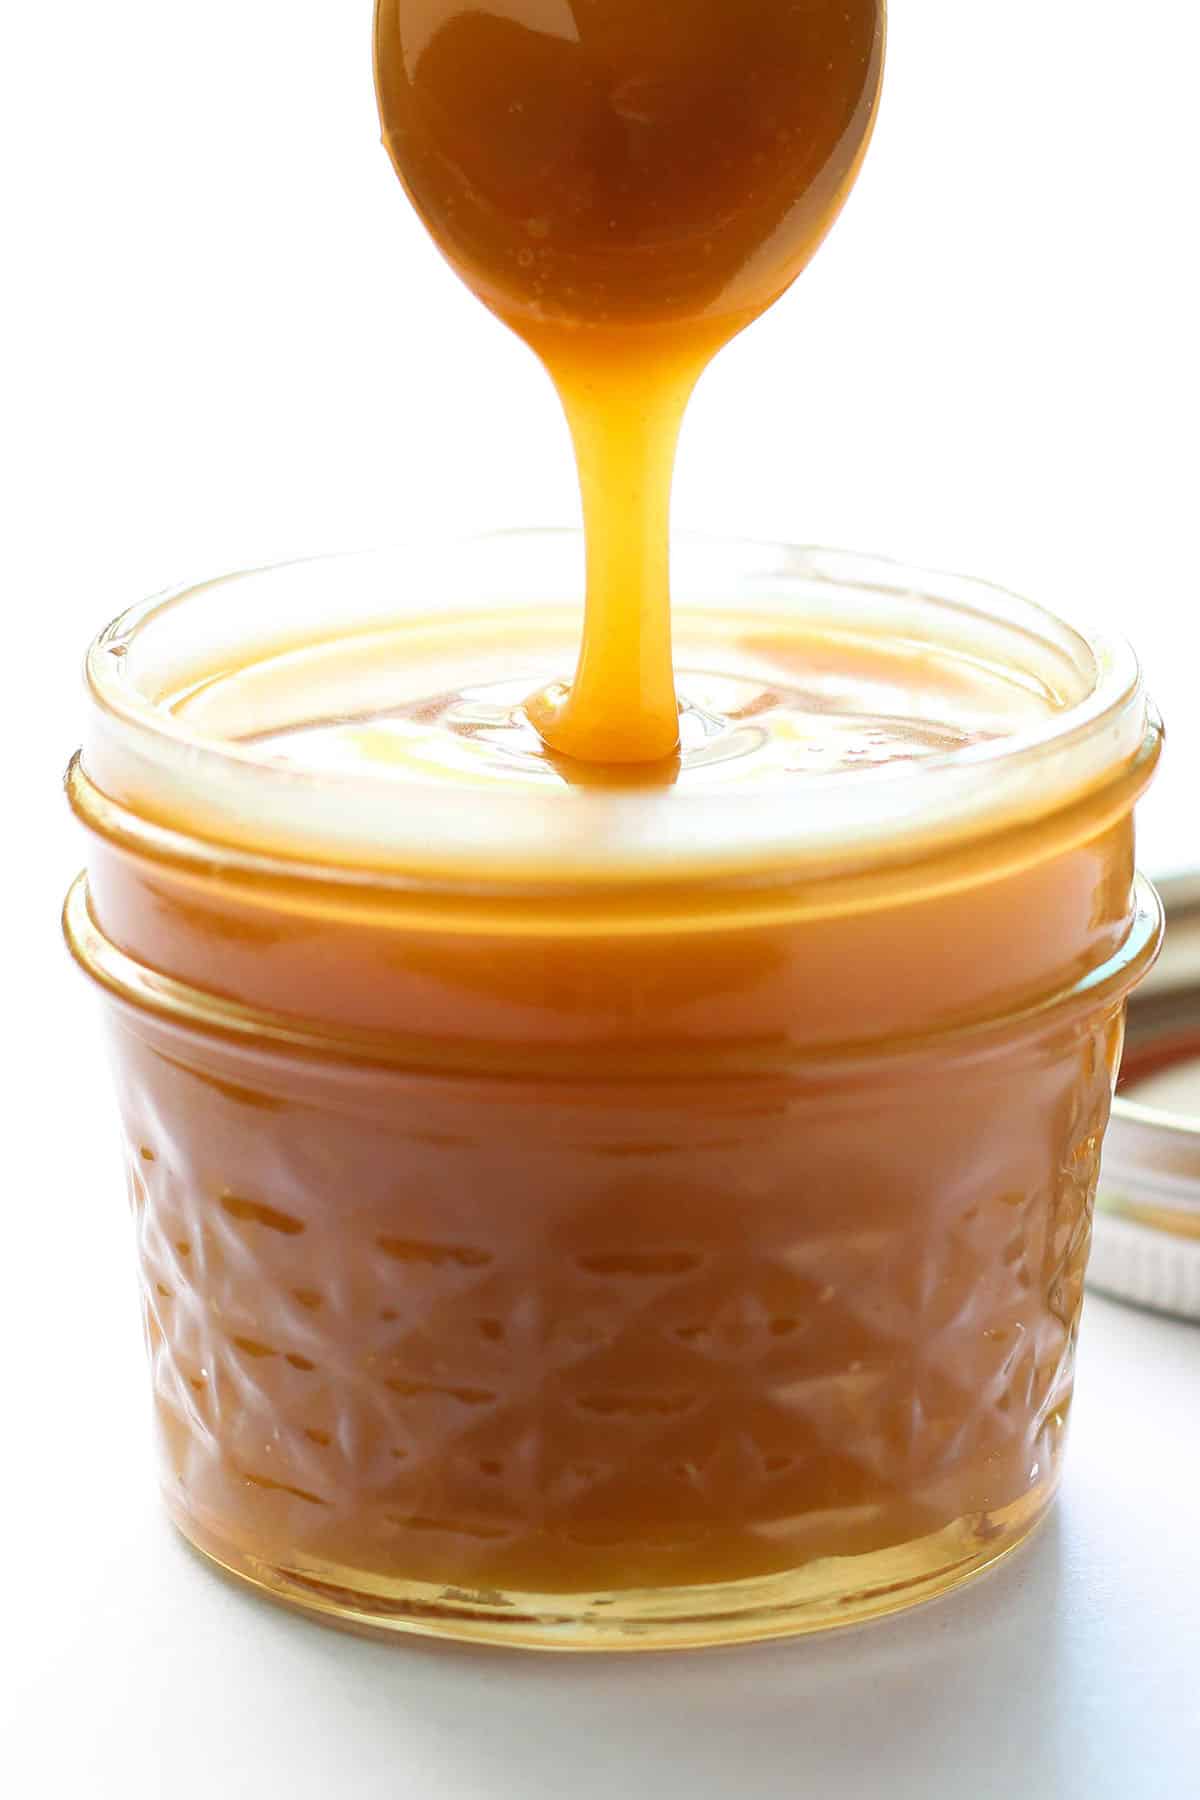 caramel sauce drizzling off a spoon into small jar